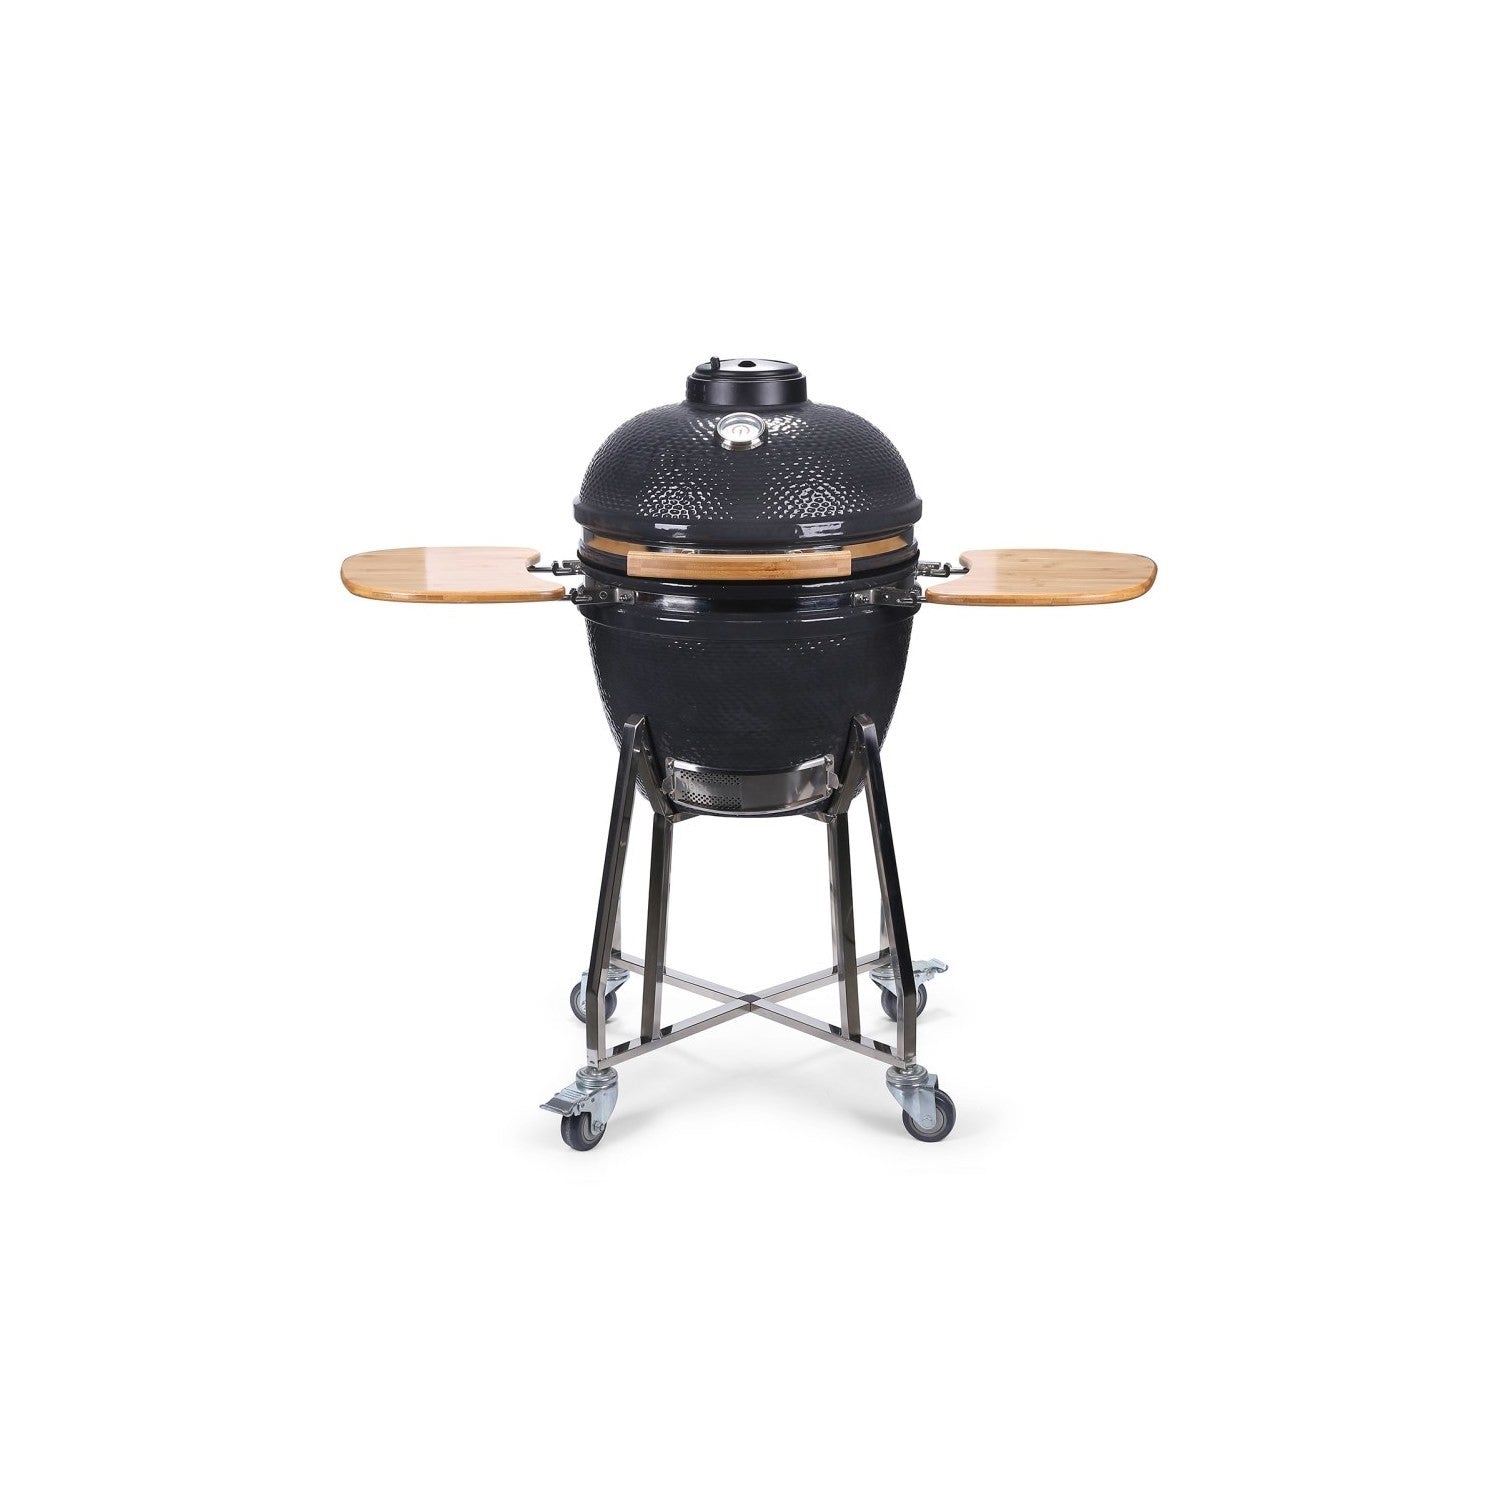 Boss Grill The Egg - 18 Inch Ceramic Kamado Style Charcoal Egg BBQ Grill